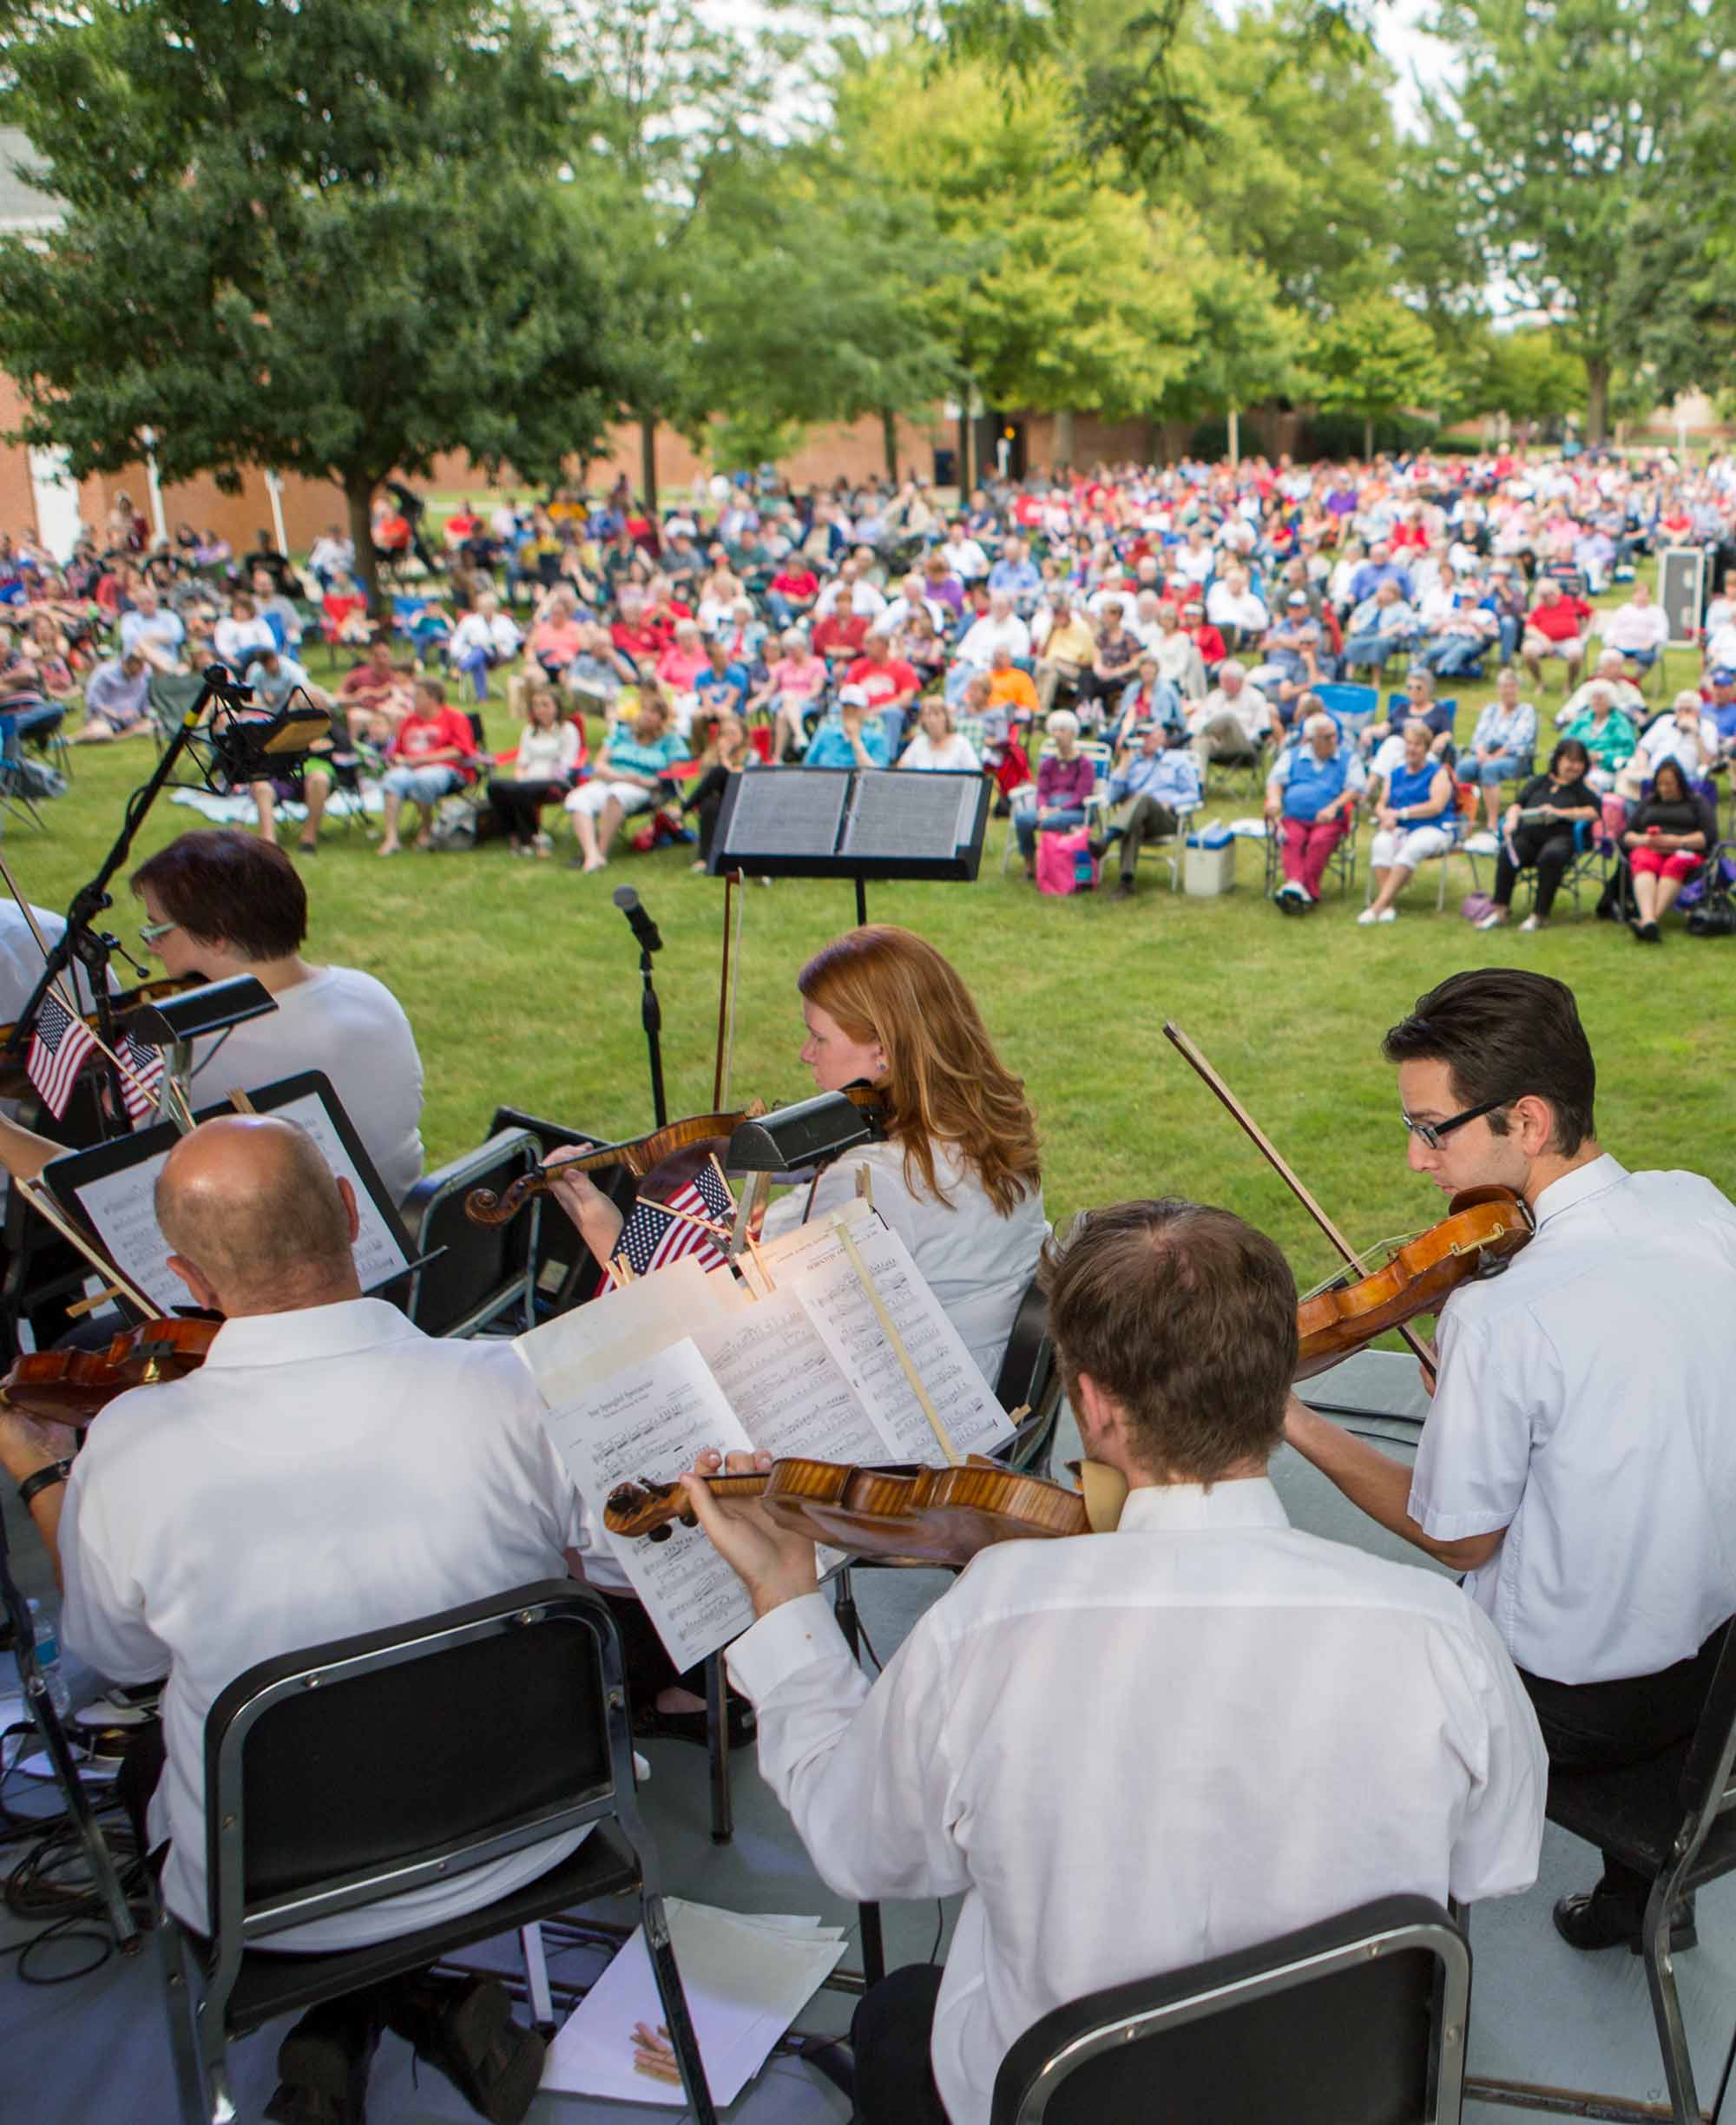 The Lima Symphony Orchestra played a “Patriotic Pops” concert outside of McIntosh Center on the campus of Ohio Northern University.